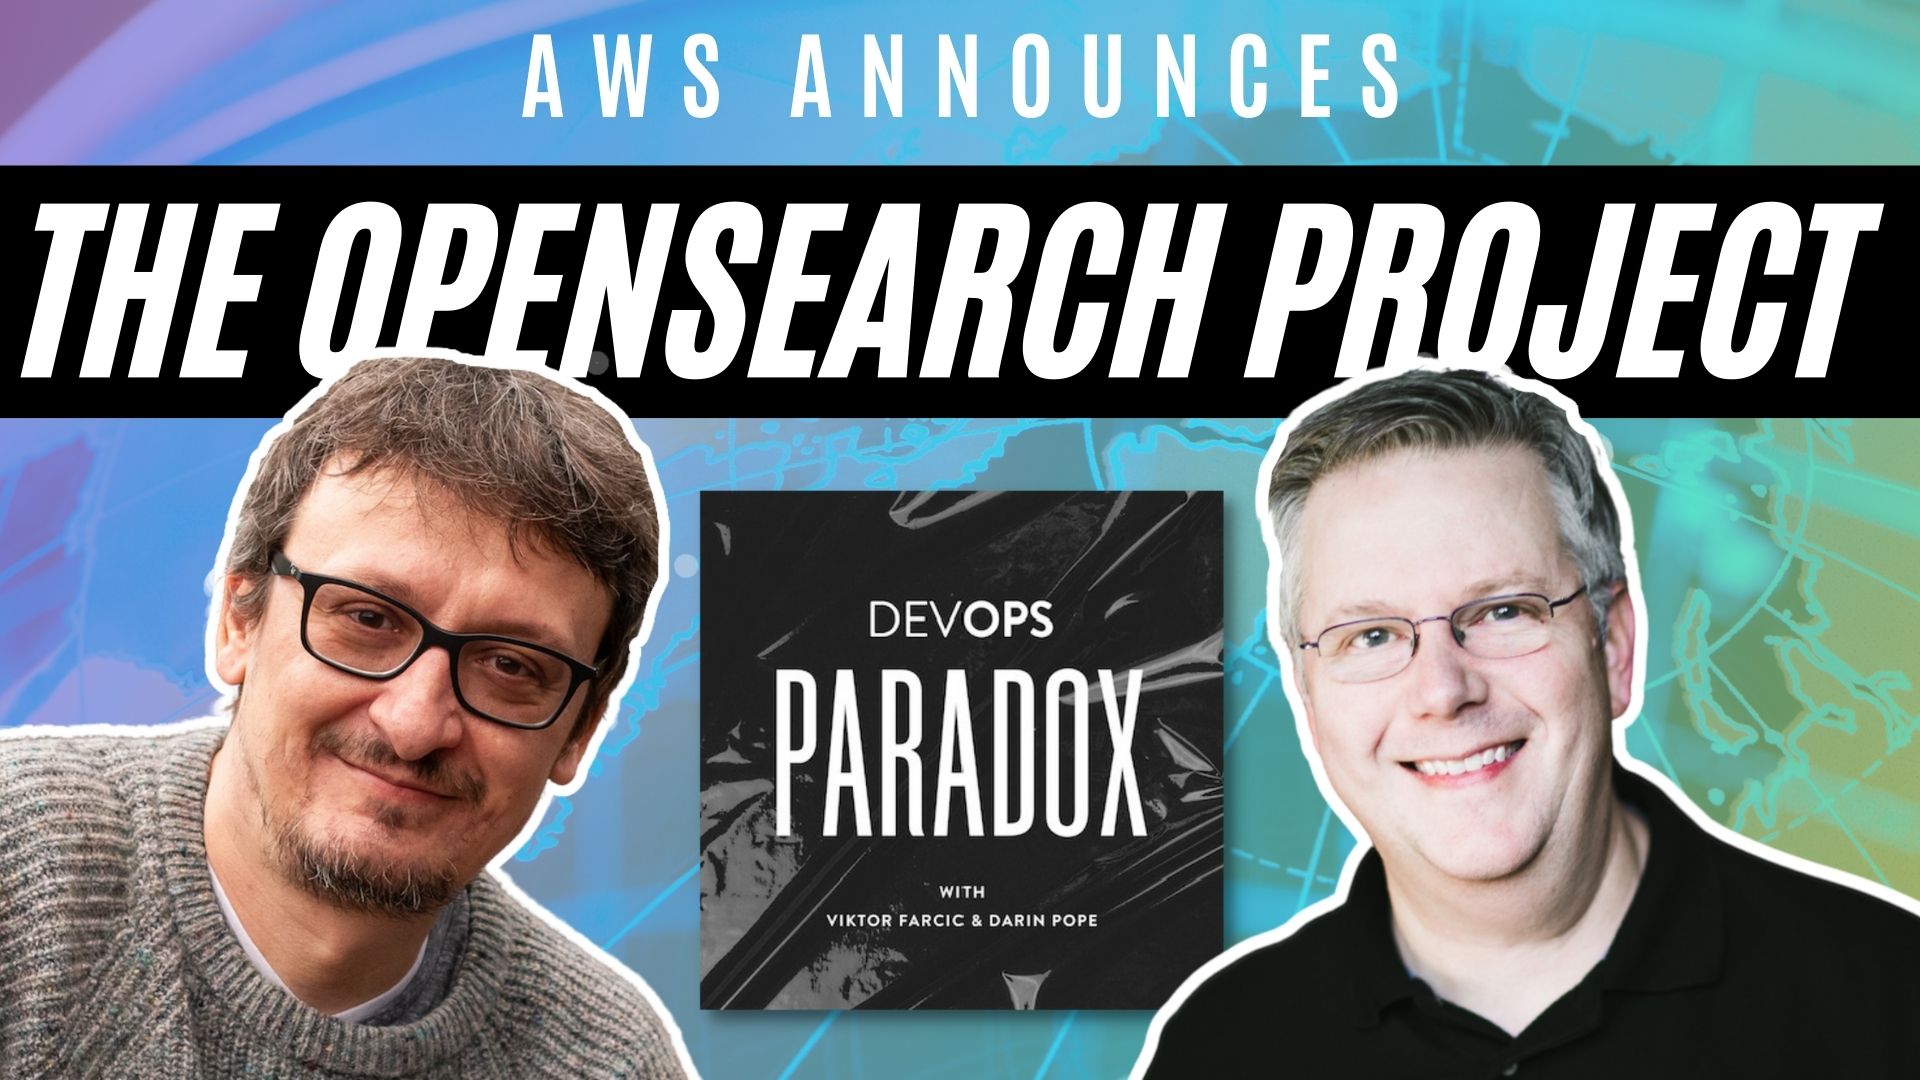 AWS Announces the OpenSearch Project - DevOps Paradox
